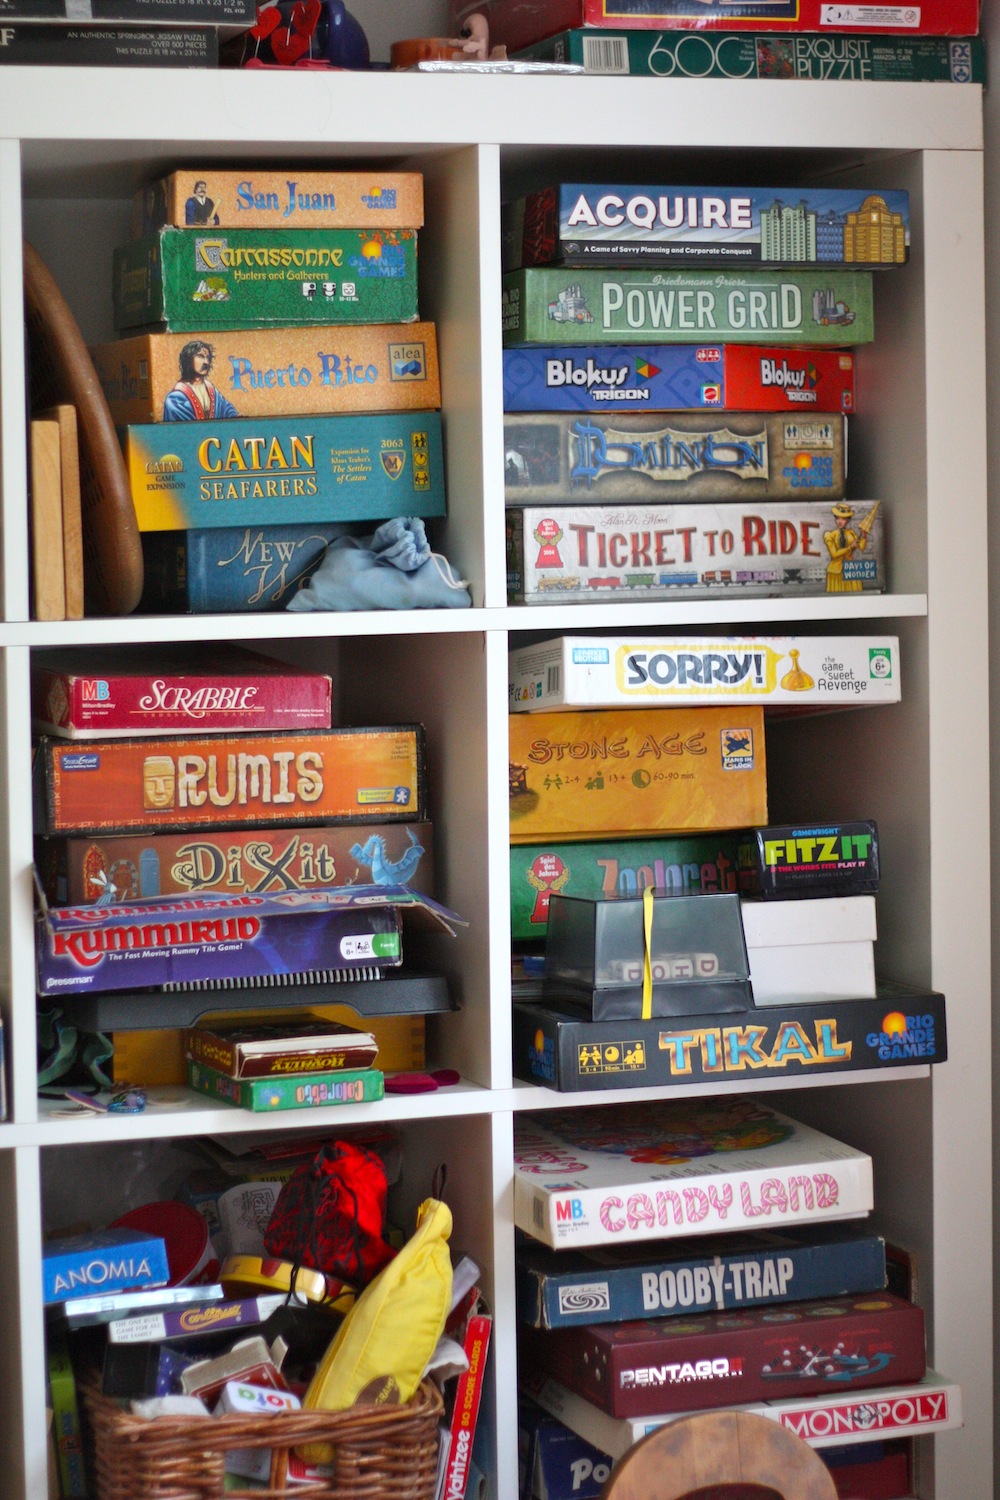 The End Games - Our board game library is always growing, come anytime,  grab a game and play for free on our tables.